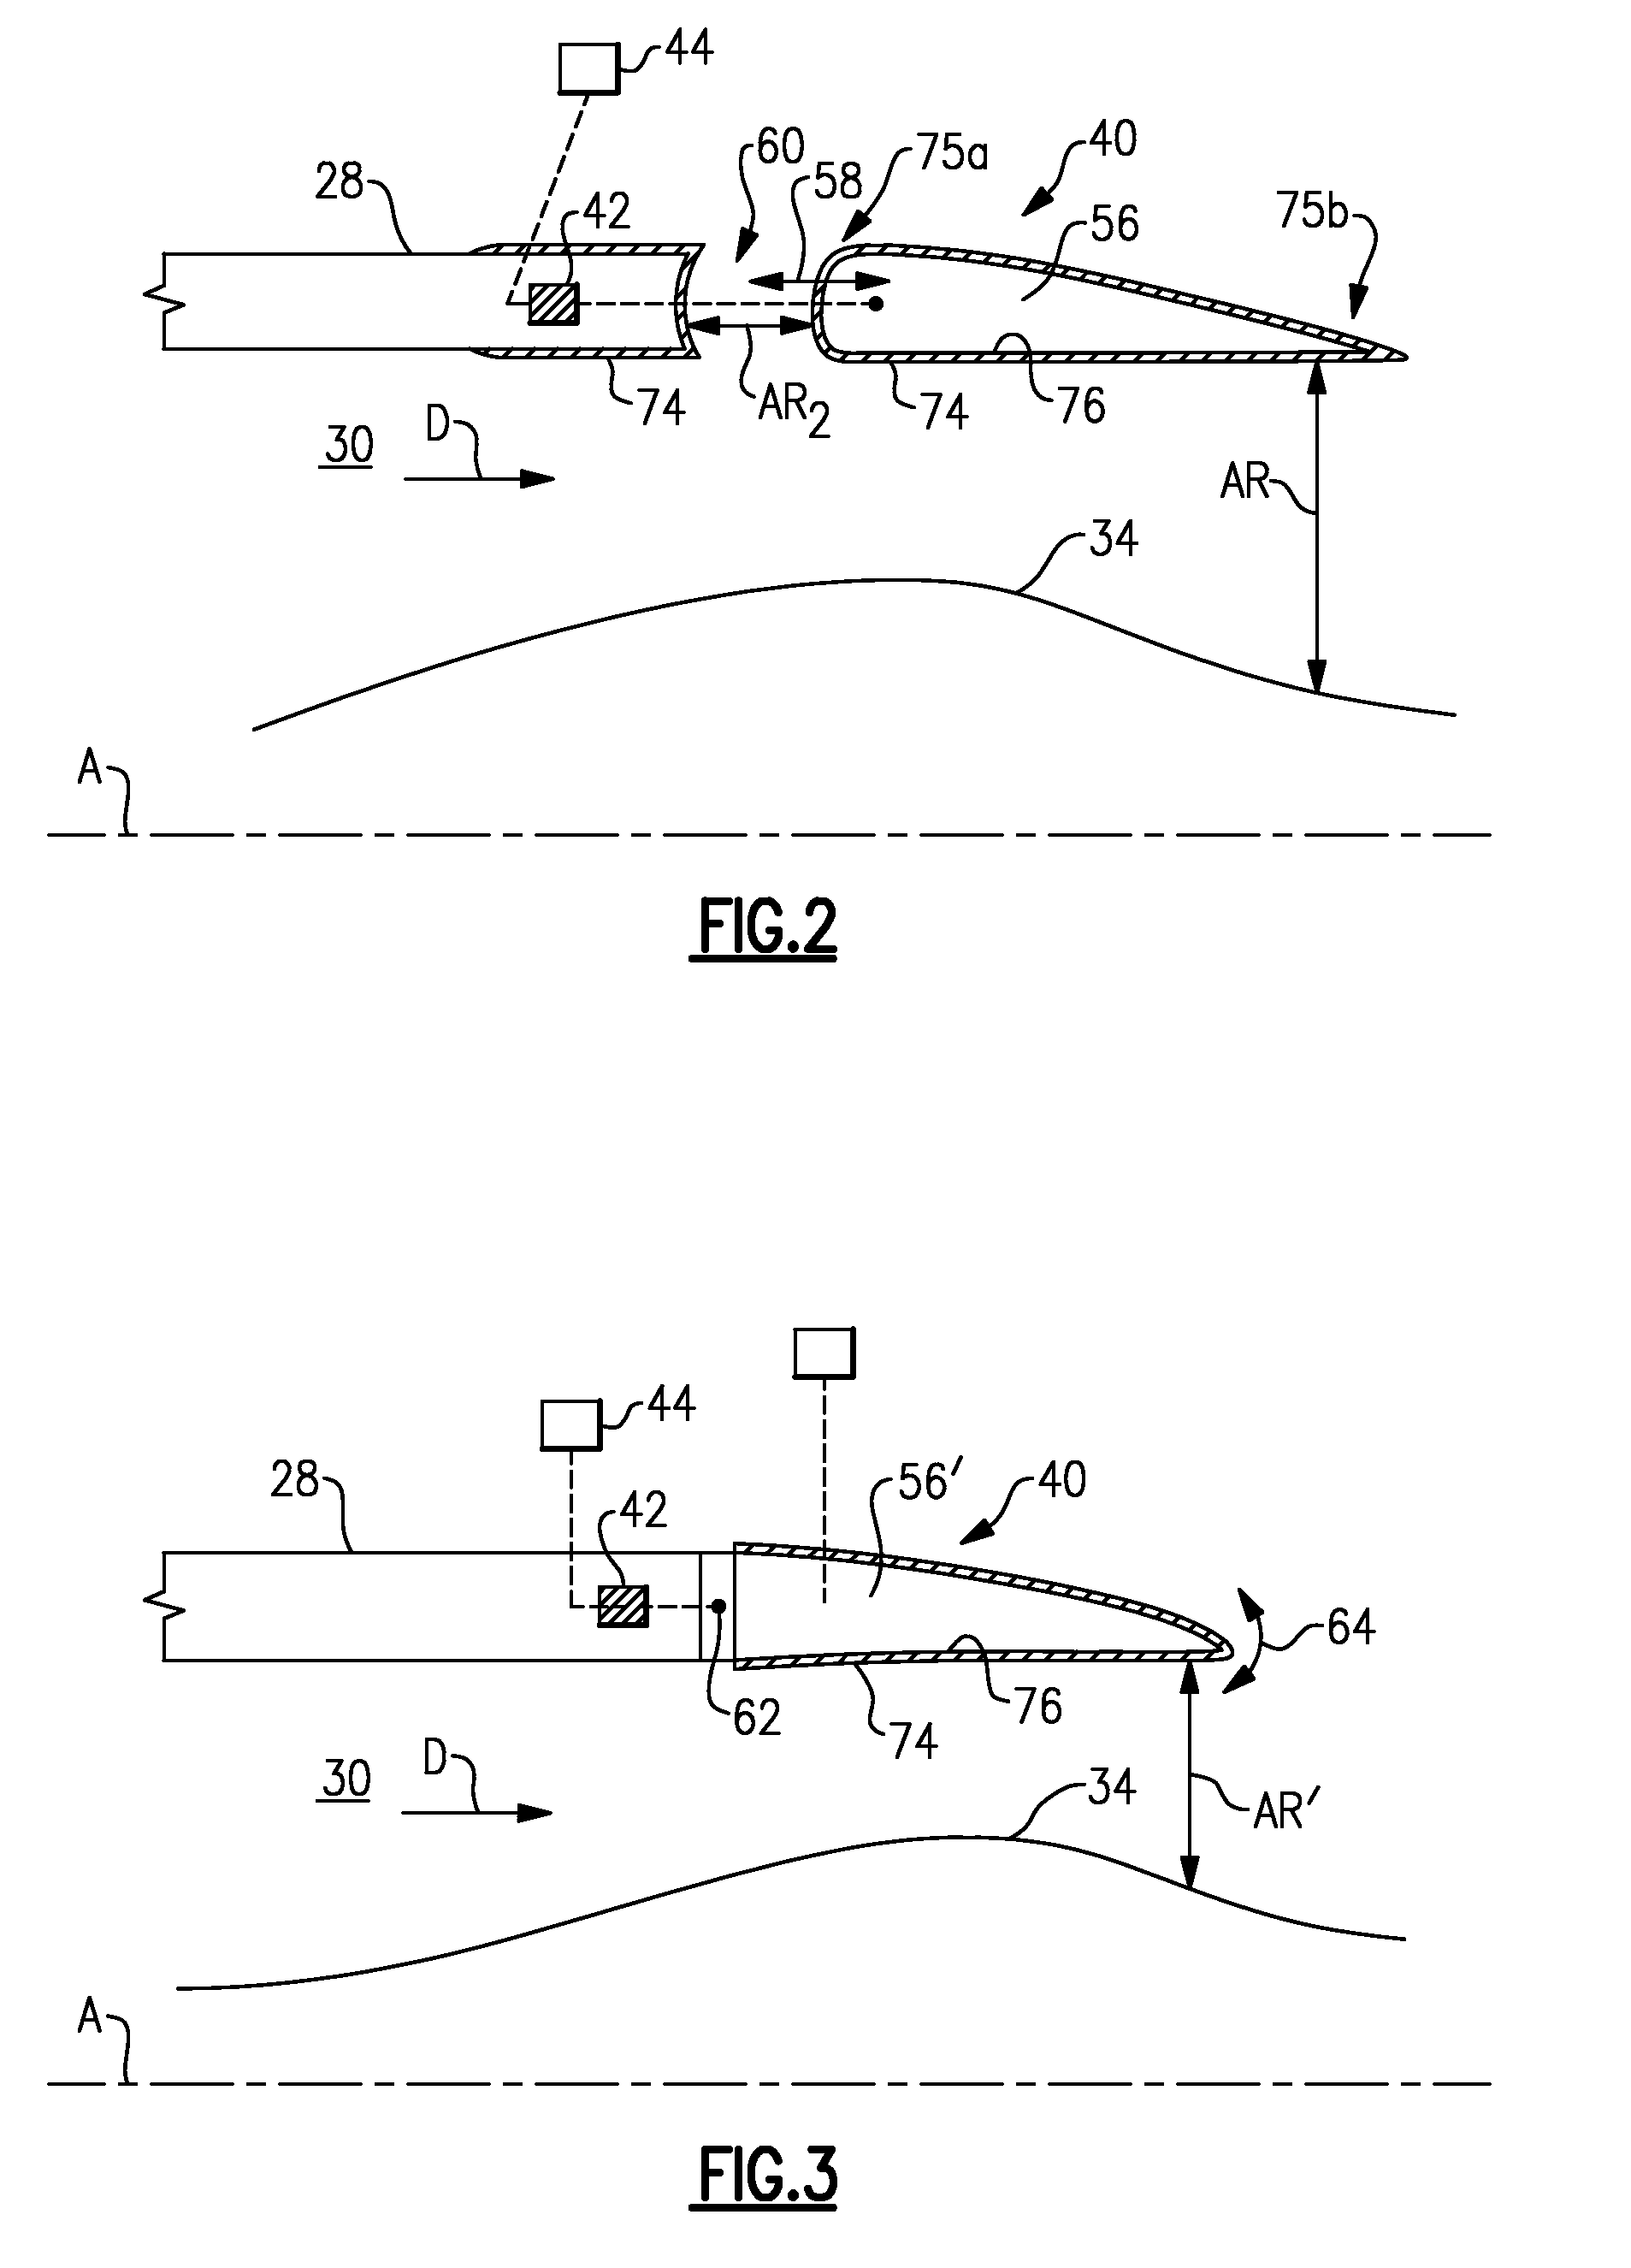 Coated variable area fan nozzle